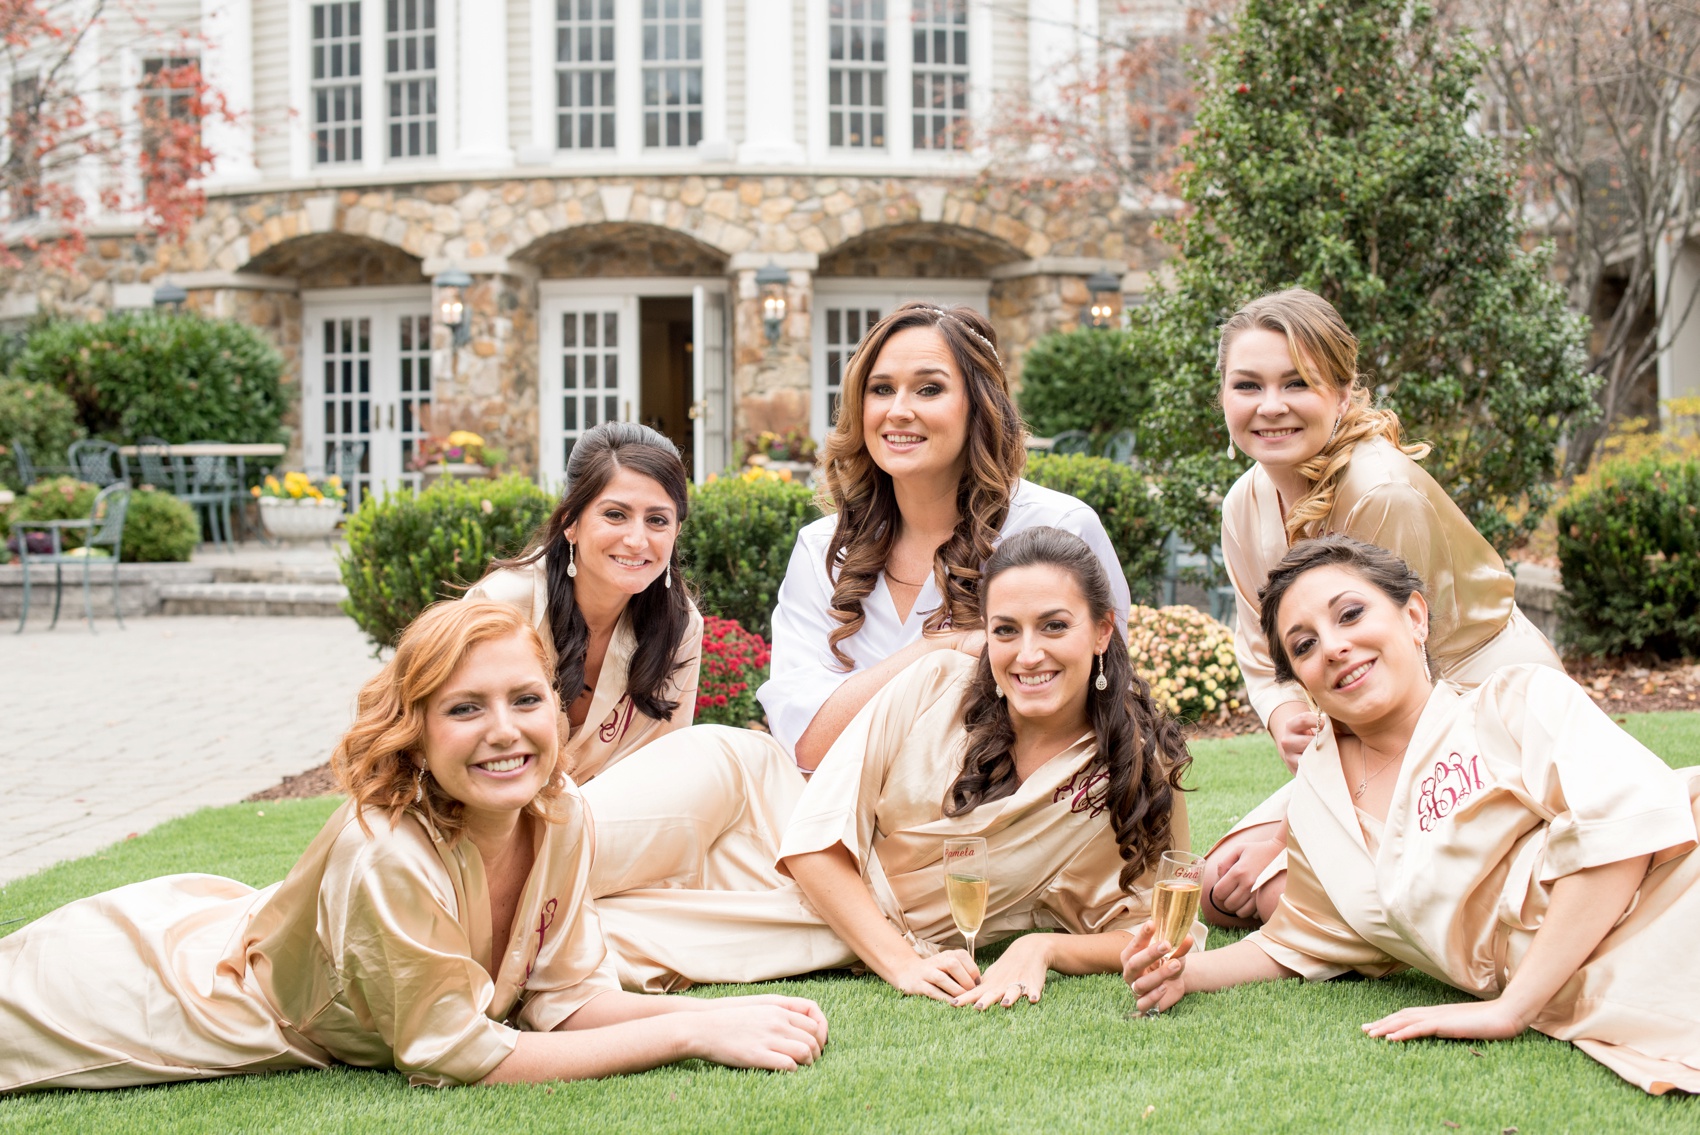 Olde Mill Inn New Jersey wedding by Mikkel Paige Photography, NYC and Raleigh wedding photographer. Bridal party silk monogram robes for getting ready.